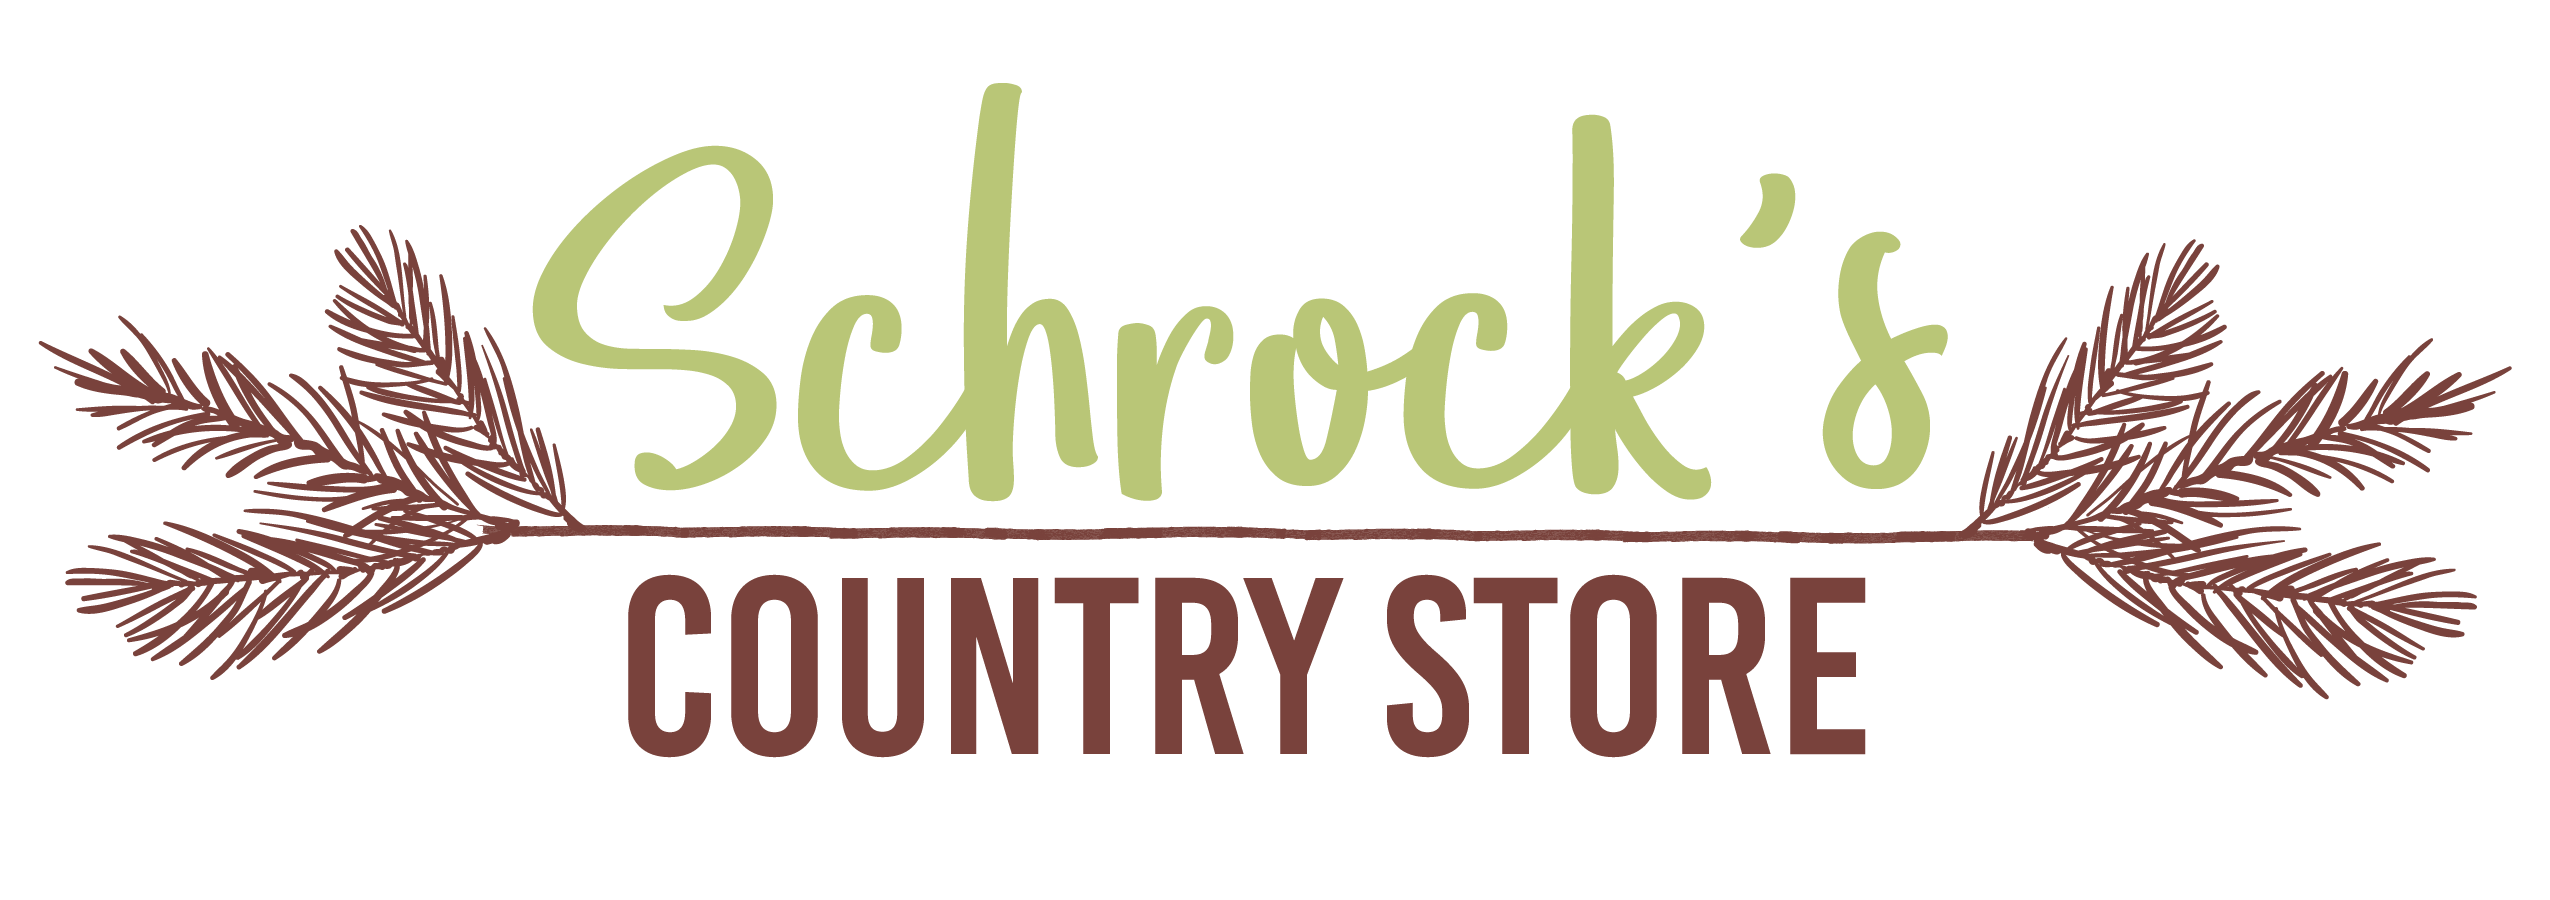 Schrock's Country Store